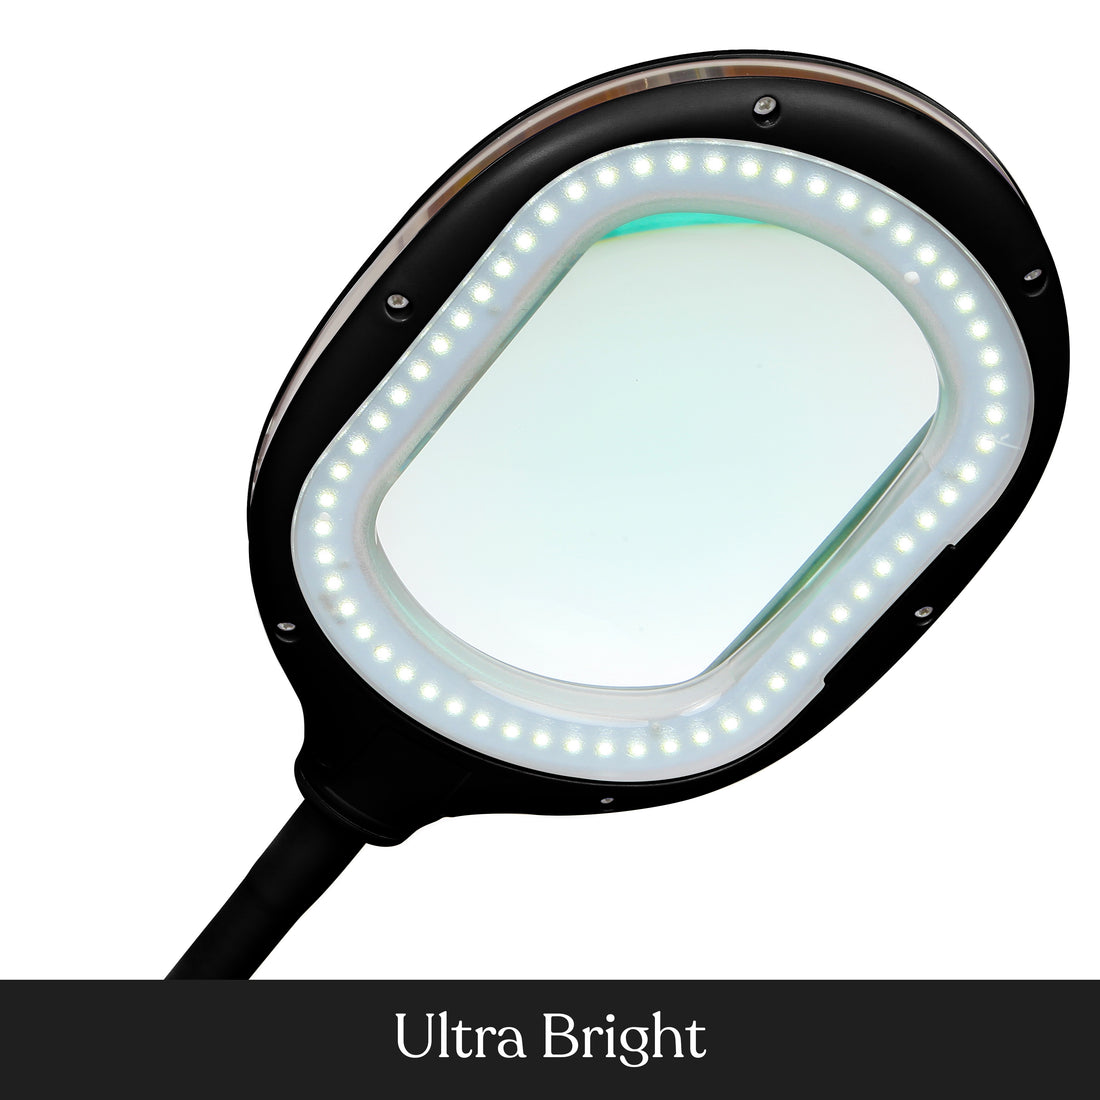 Brightech LightView Pro 3 in 1 Magnifying Lamp - Bright LED Light